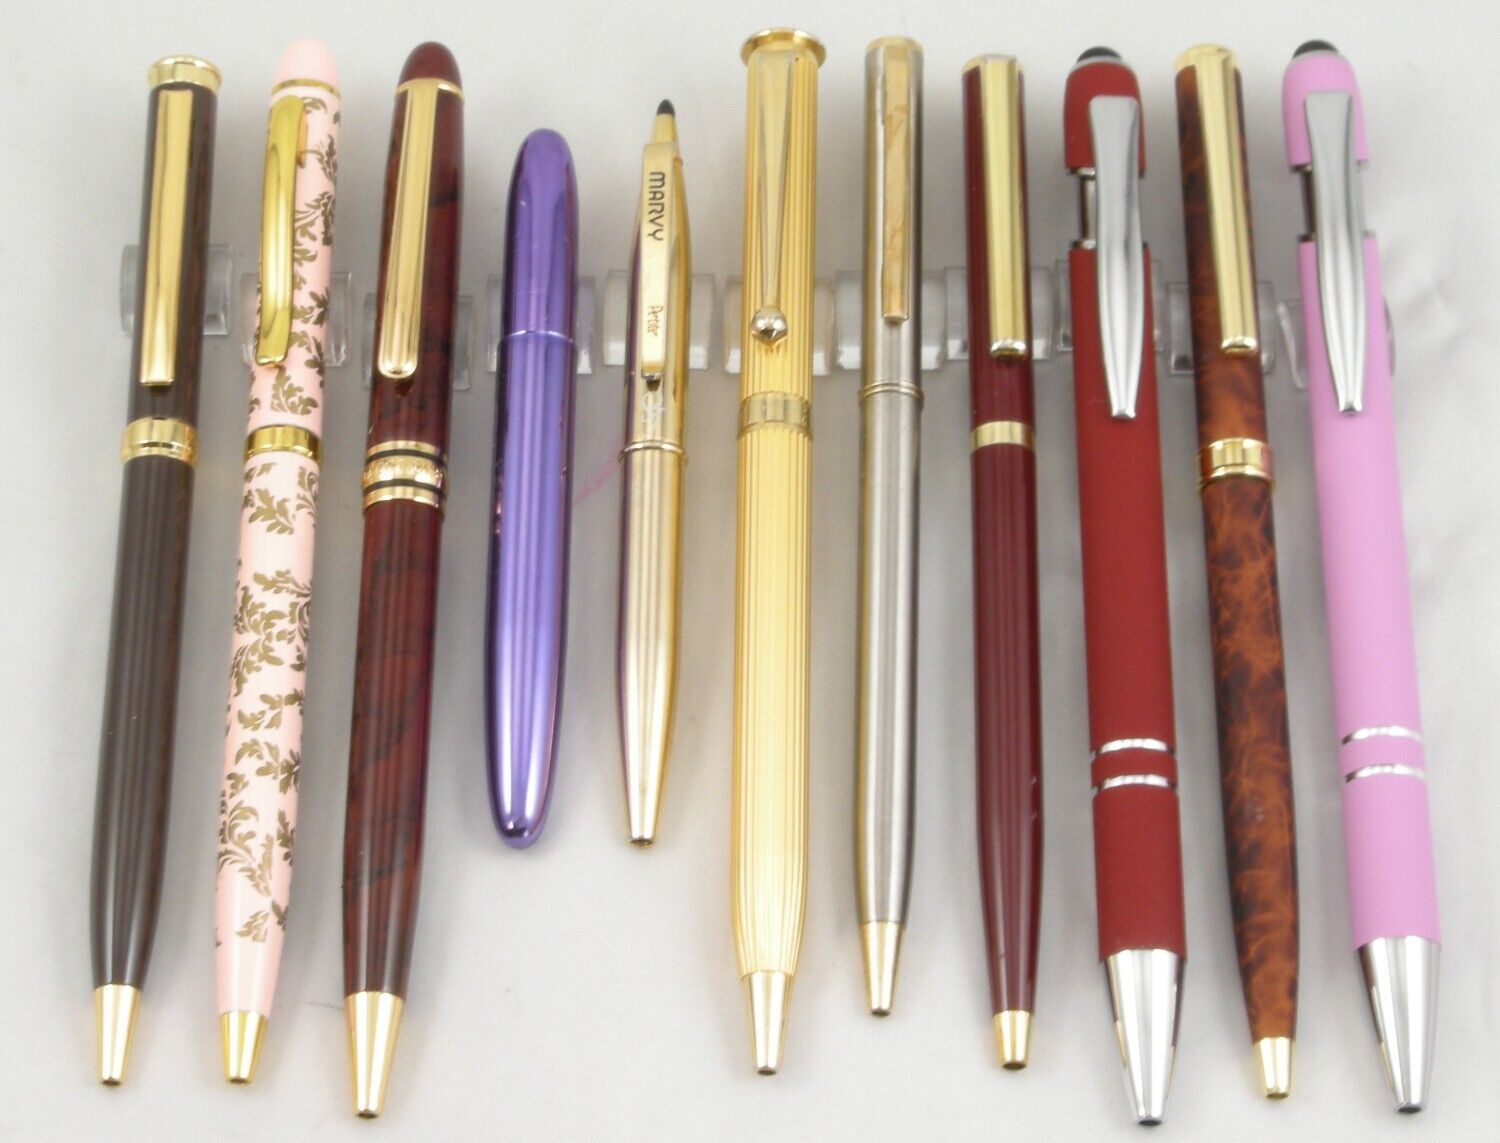 11 Great Mostly New Metal Ballpoint Pens - All Working - EXCELLENT PENS